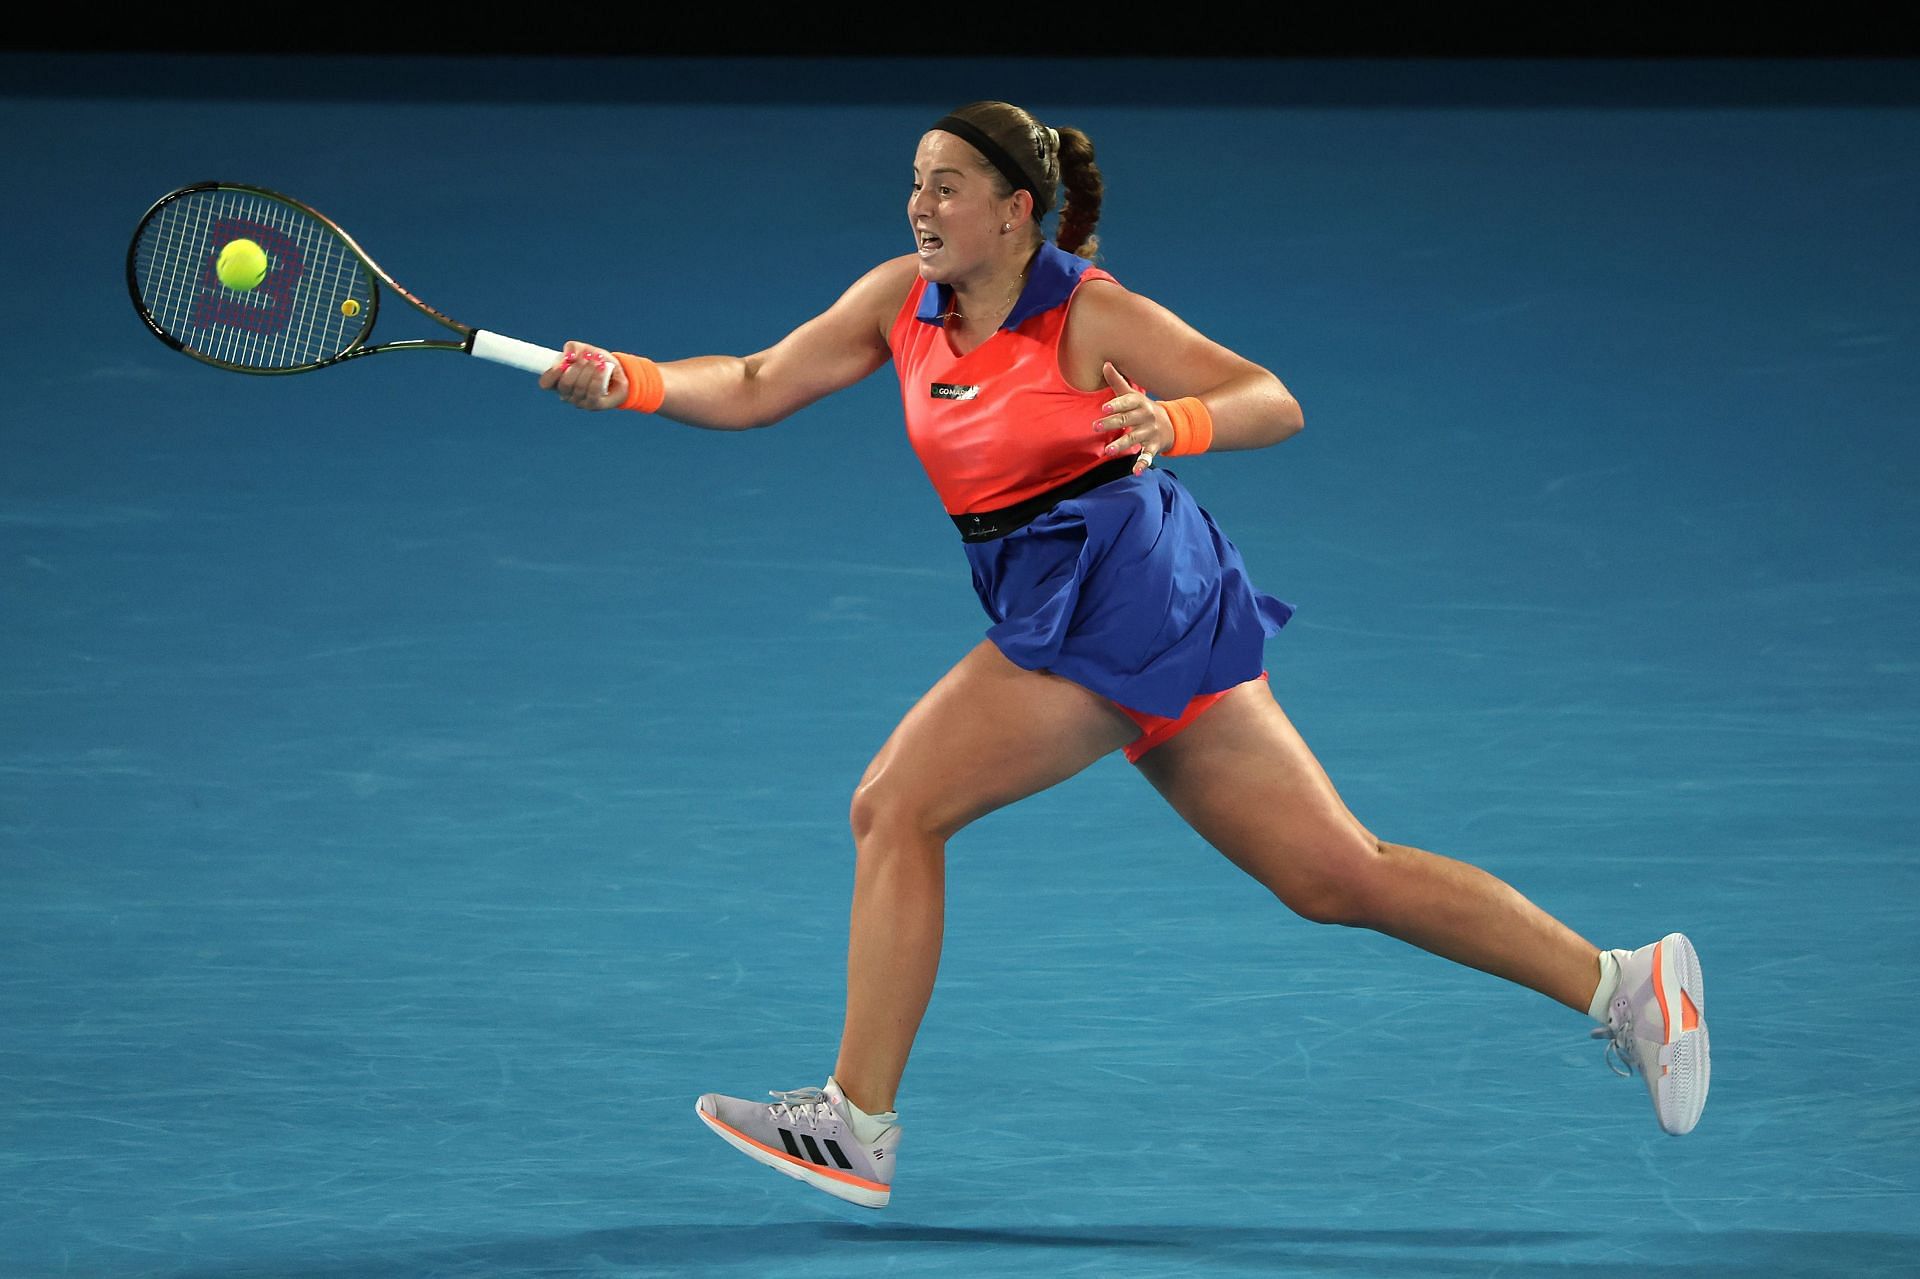 Jelena Ostapenko is seeded fifth at the 2023 Abu Dhabi Open.